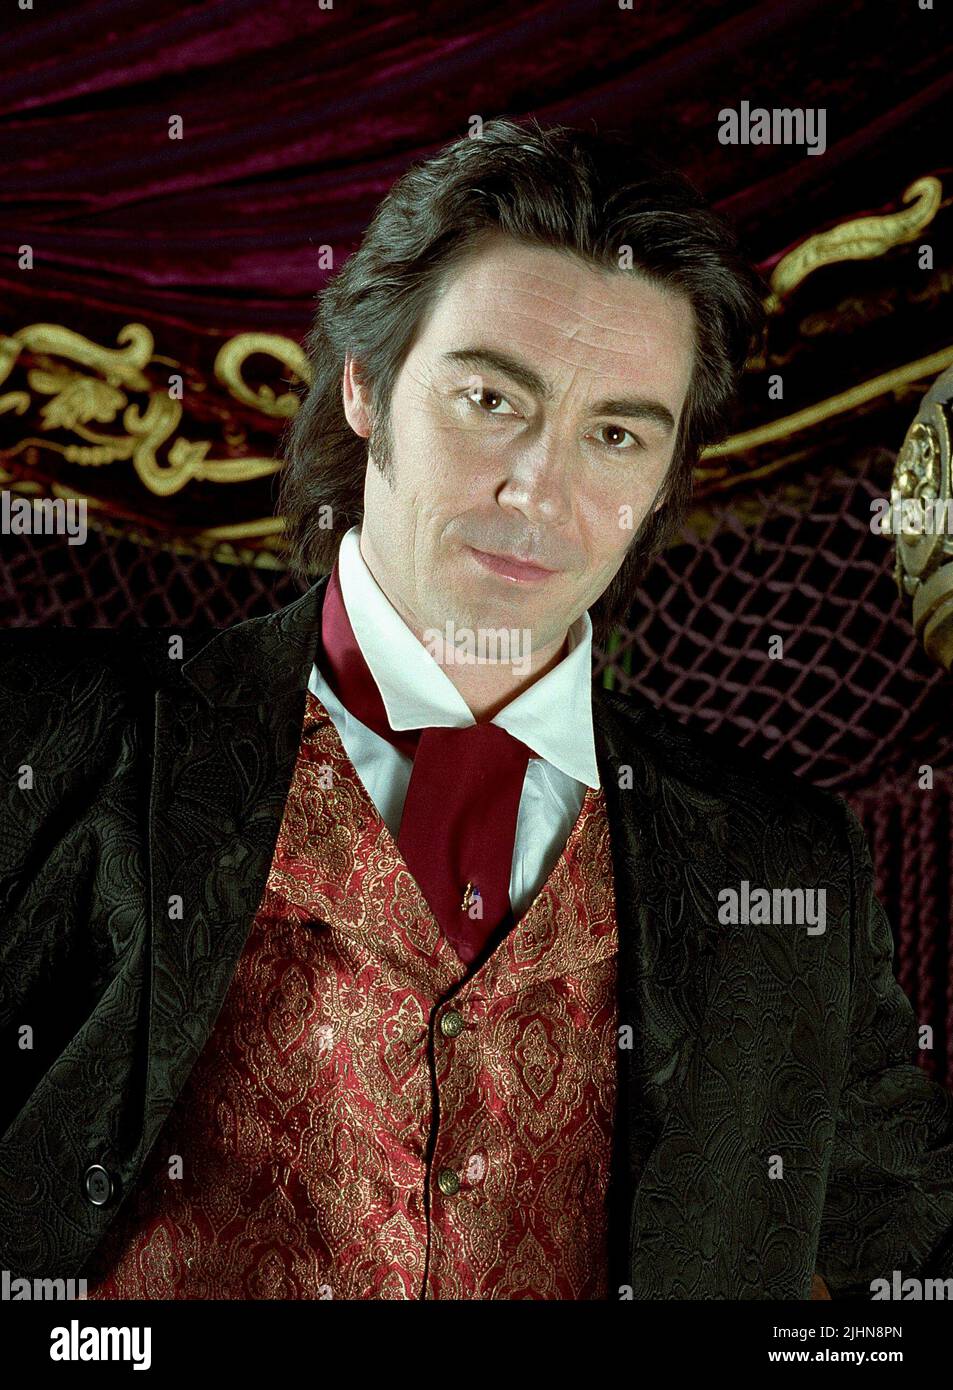 NATHANIEL PARKER, THE HAUNTED MANSION, 2003 Stock Photo